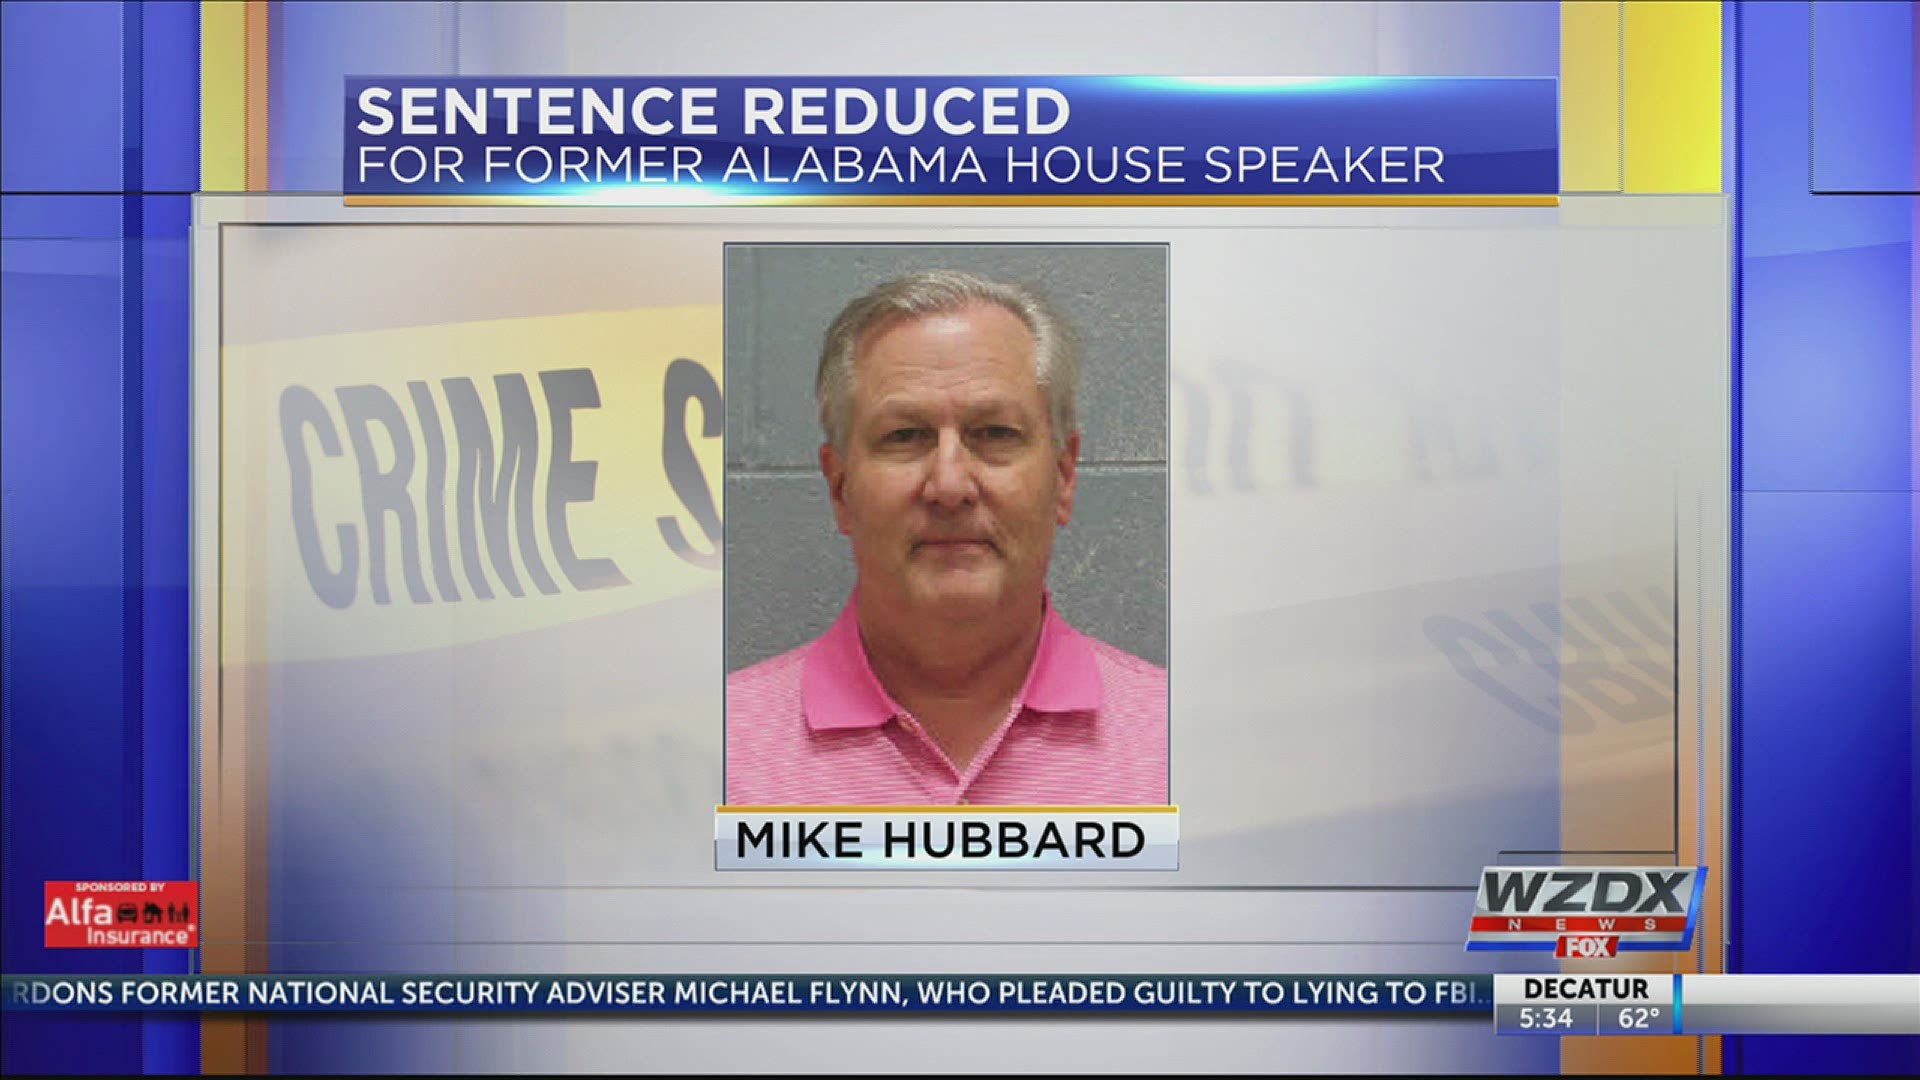 Former AL House speaker Mike Hubbard had his sentence on ethics charges reduced to 28 months from 48 months.